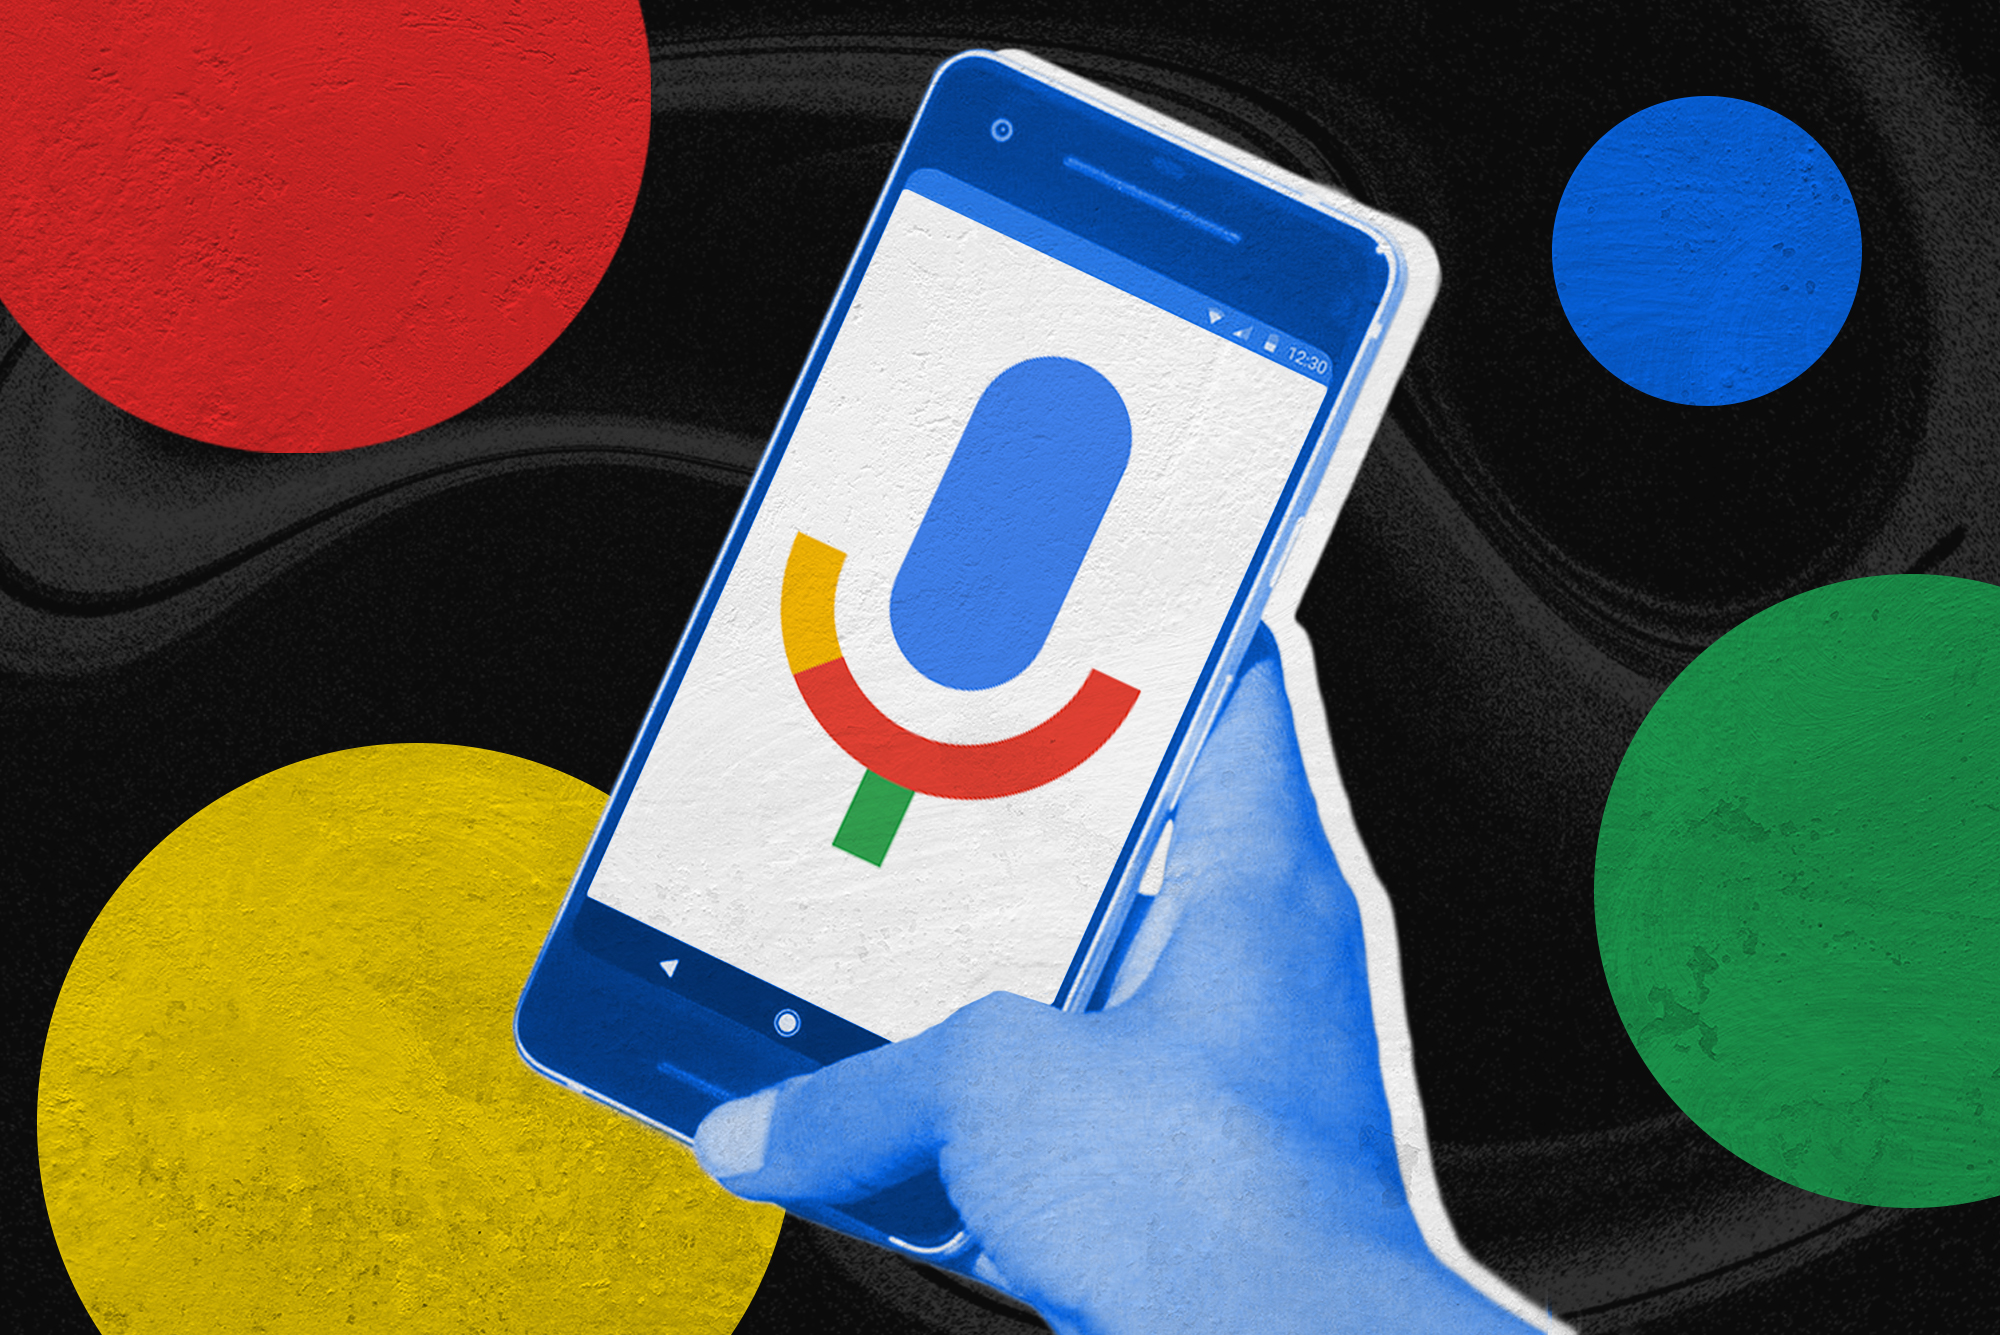 Google Assistant - What can it do in 2020? 